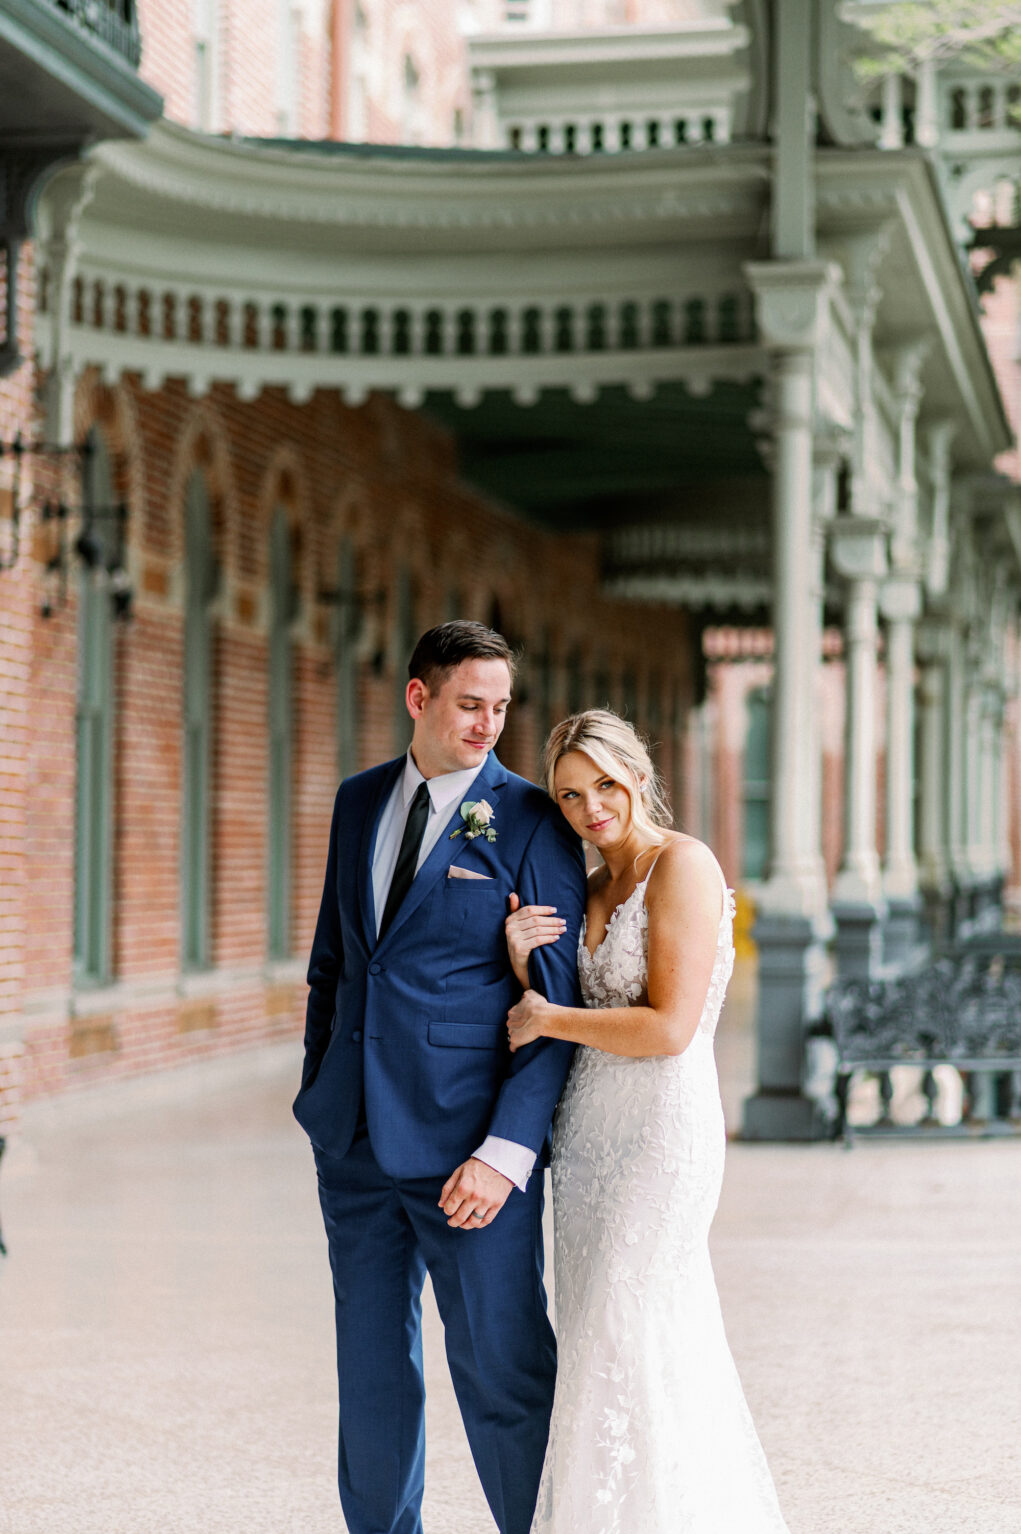 Intimate Bride and Groom Wedding Portrait at University of Tampa | Photographer Dewitt for Love